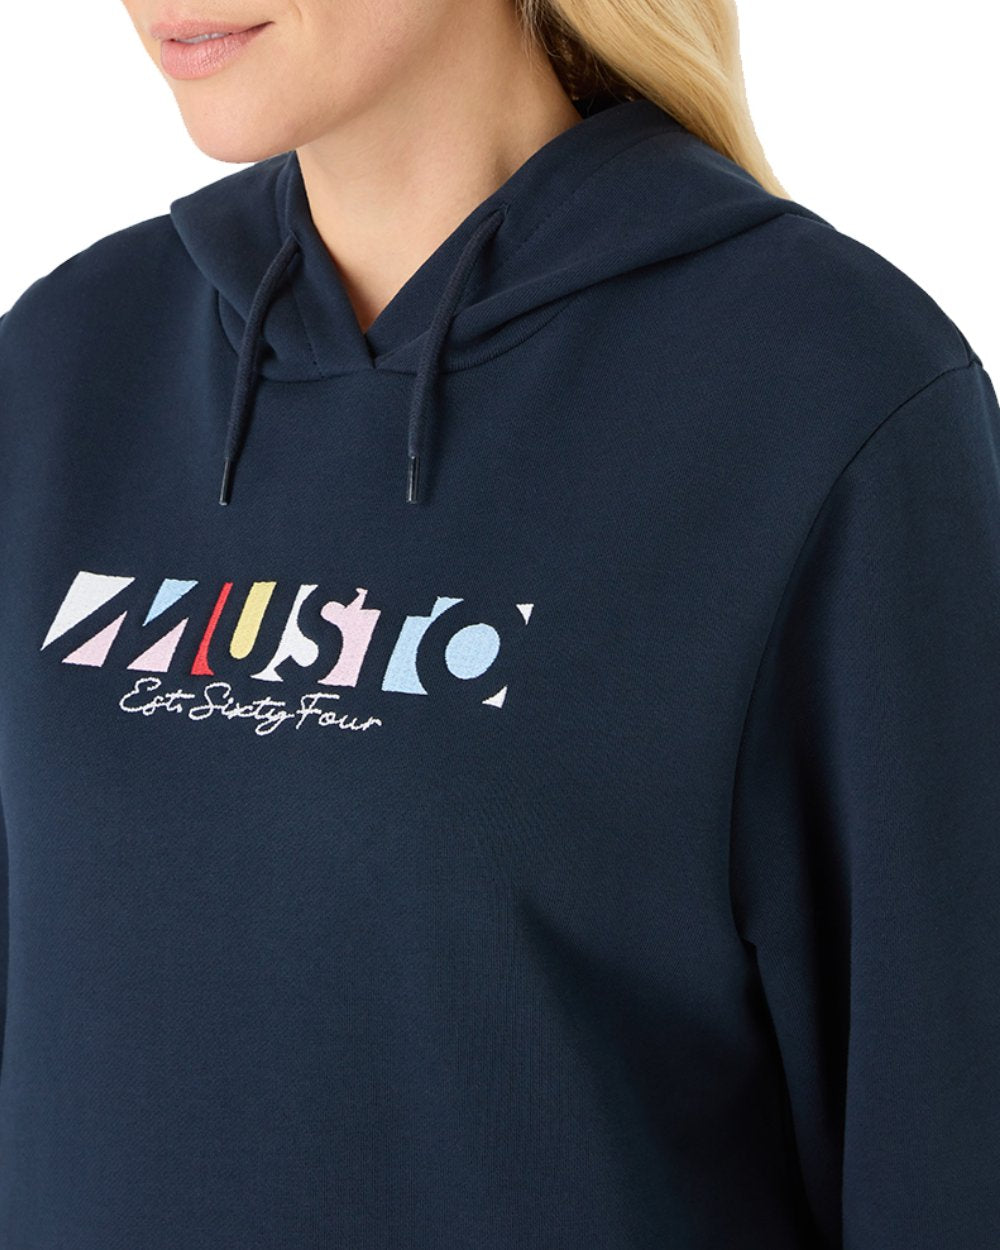 Navy Coloured Musto Womens 1964 Hoodie On A White Background 